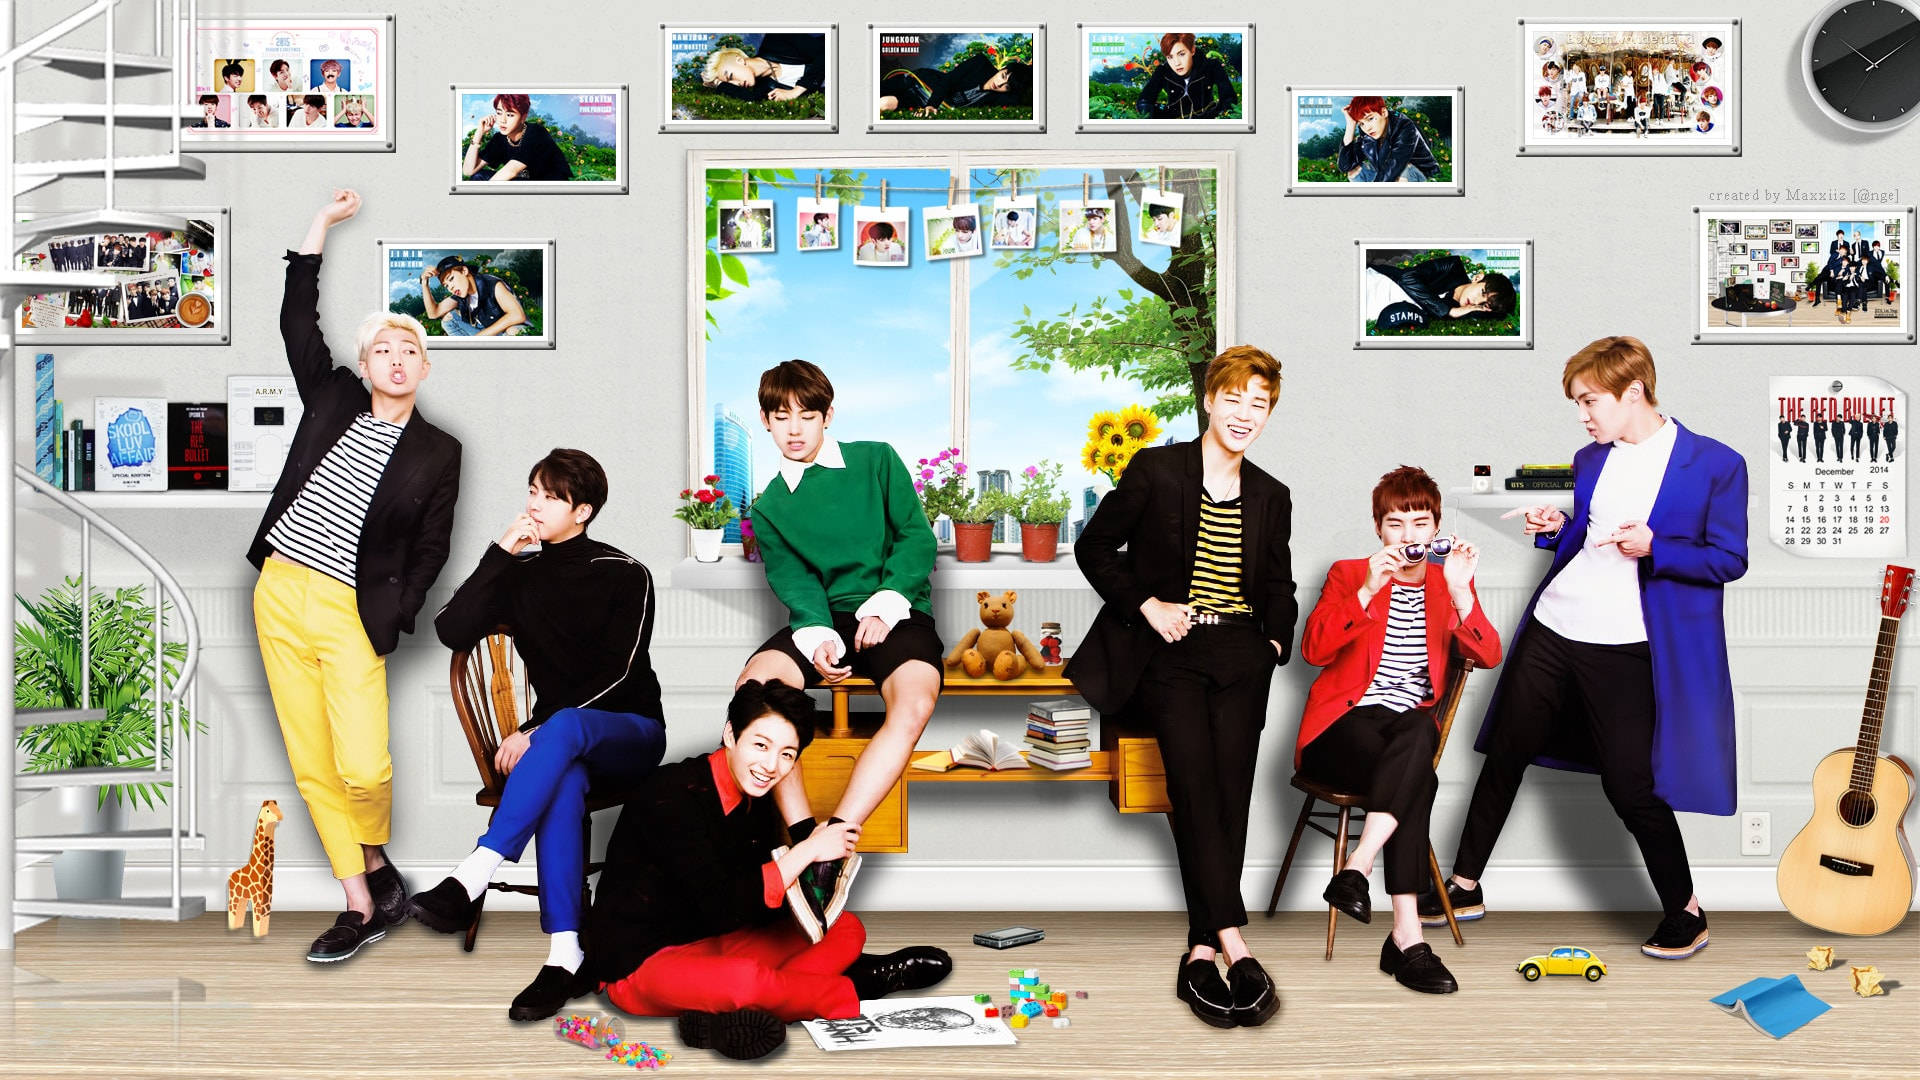 A Group Of Boys Sitting In A Room With Pictures Background